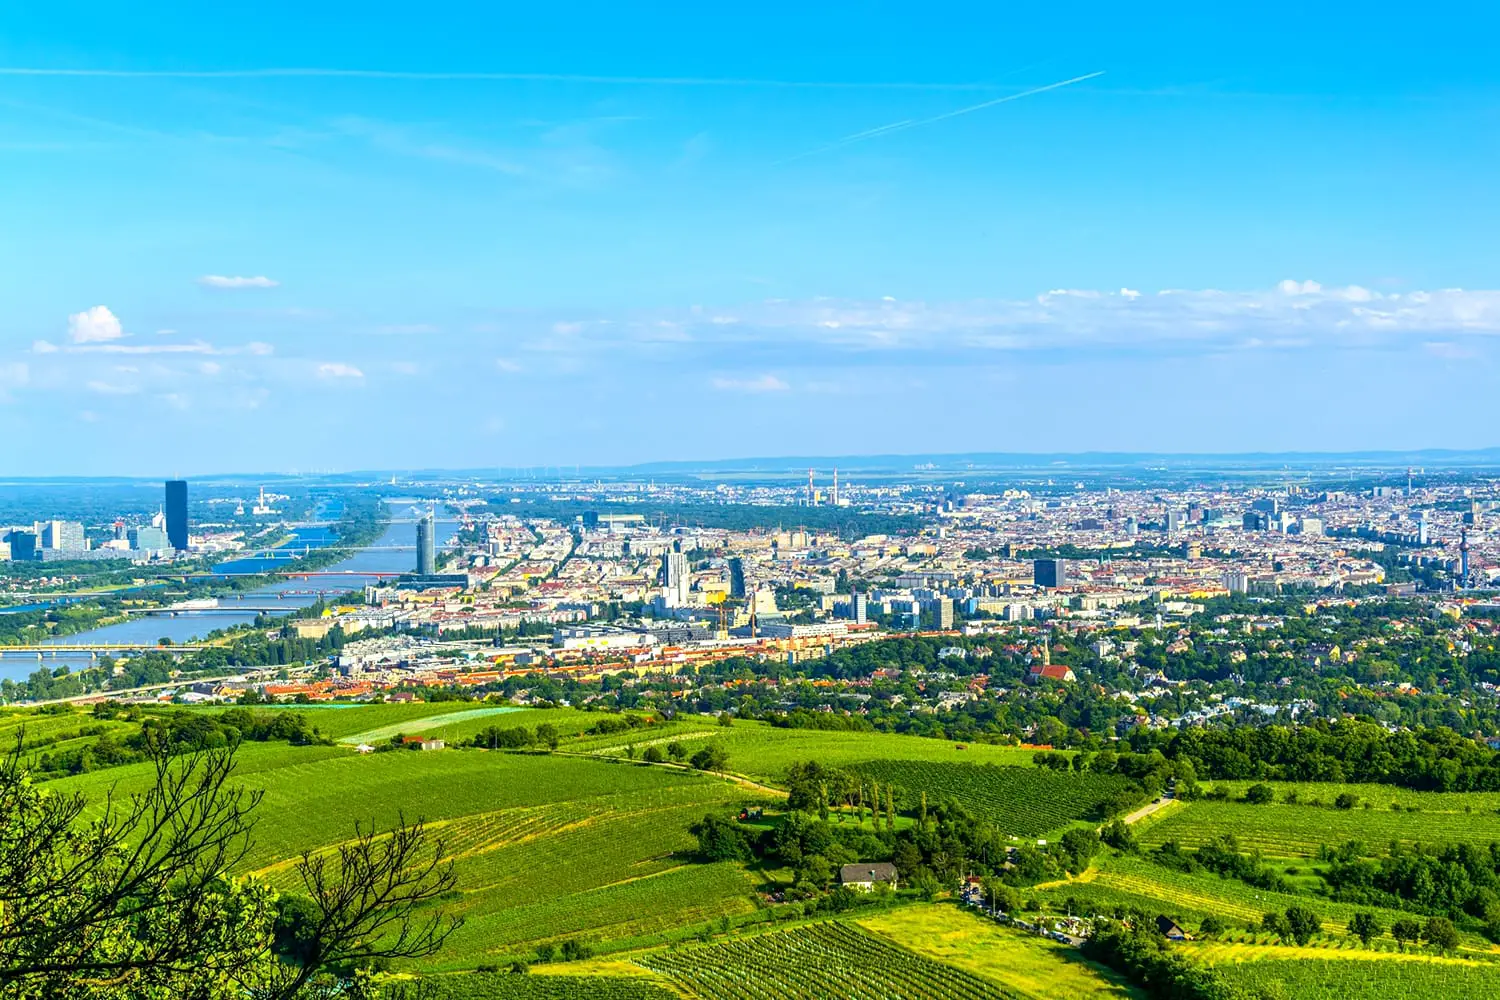 panorama view of vienna taken from the kahlenberg hill in austria